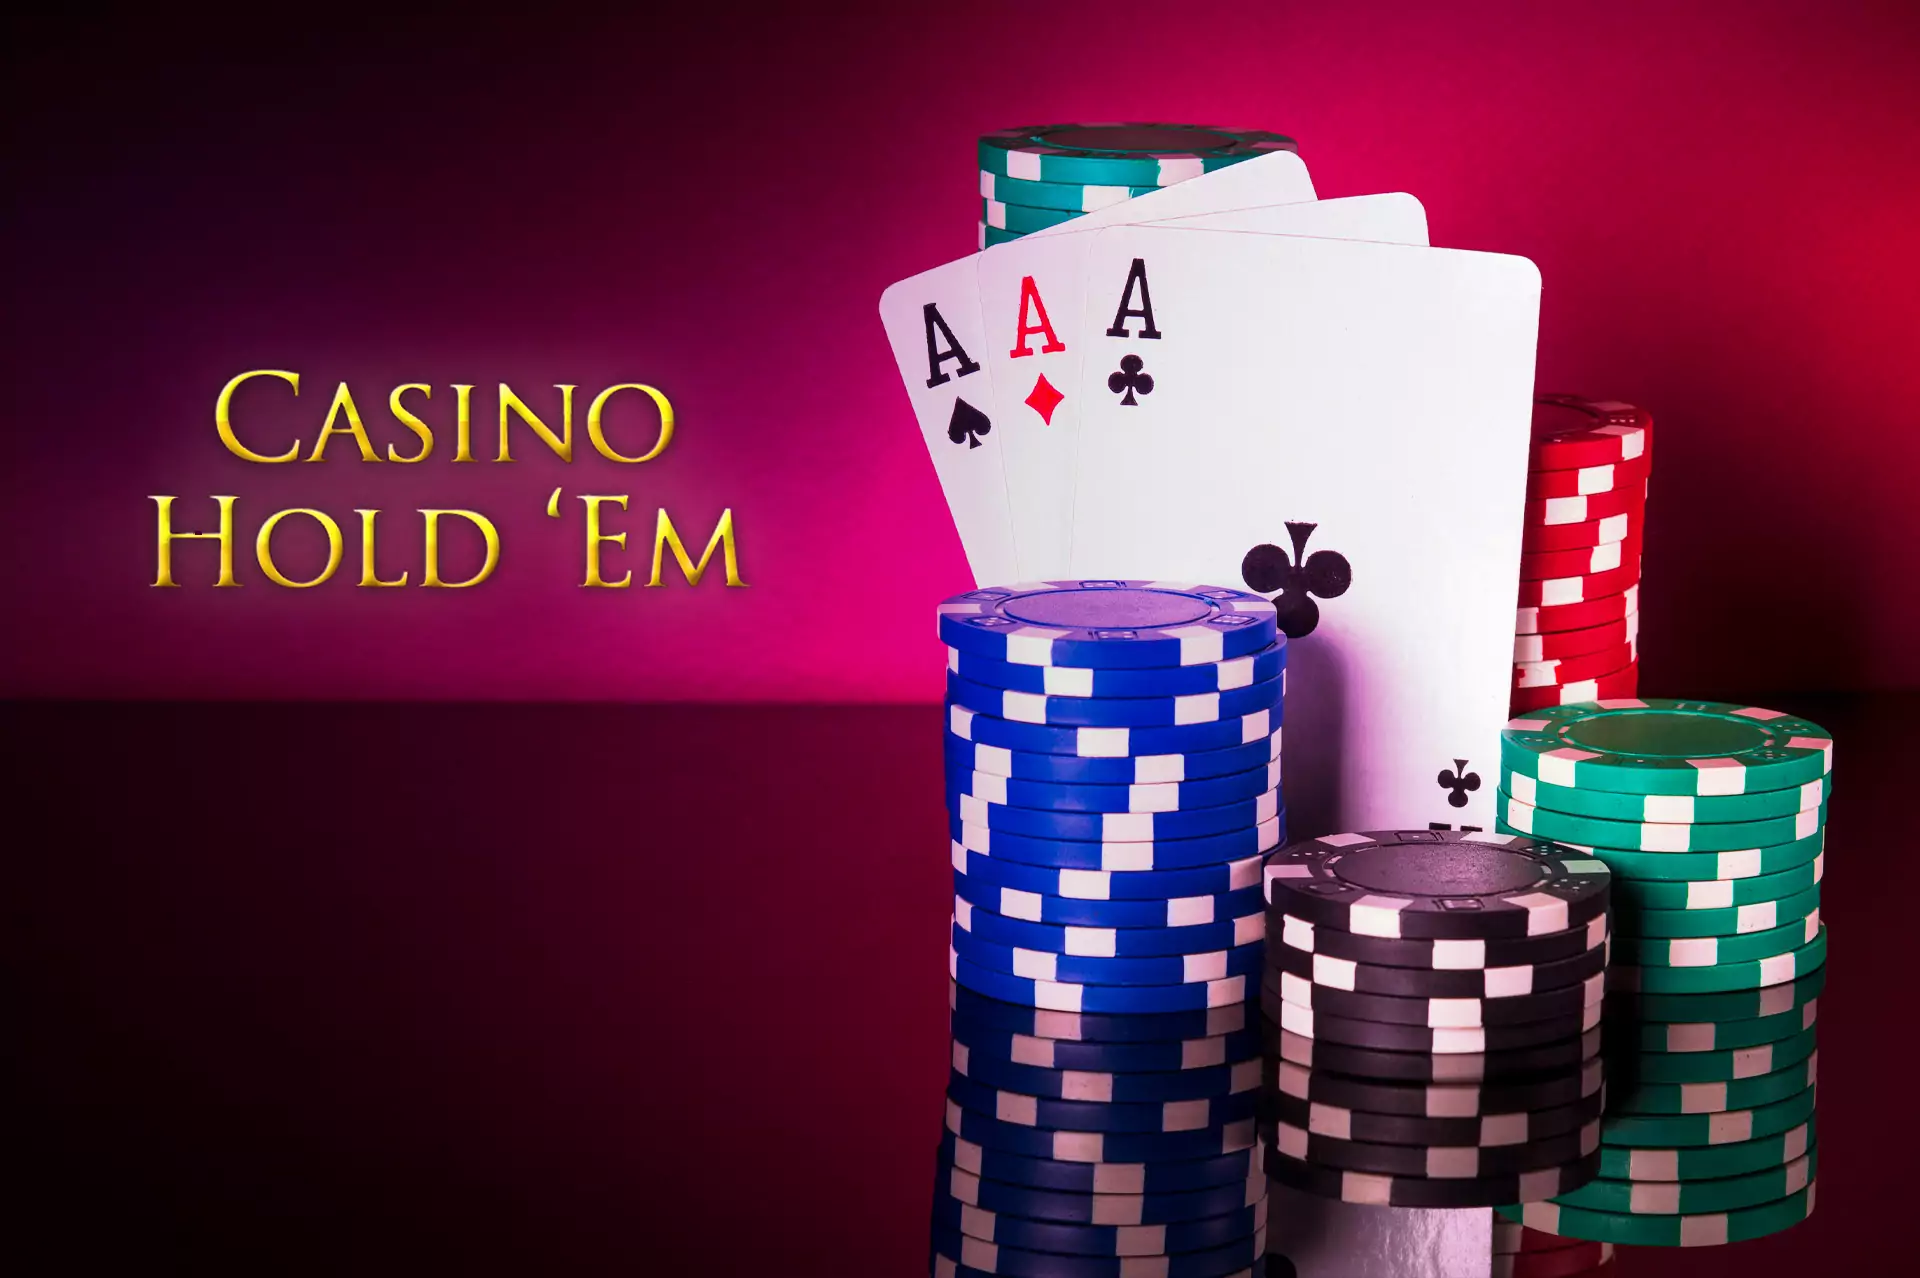 In online casinos, there are two the most popular types of Hold'em games: Texas and Omaha.